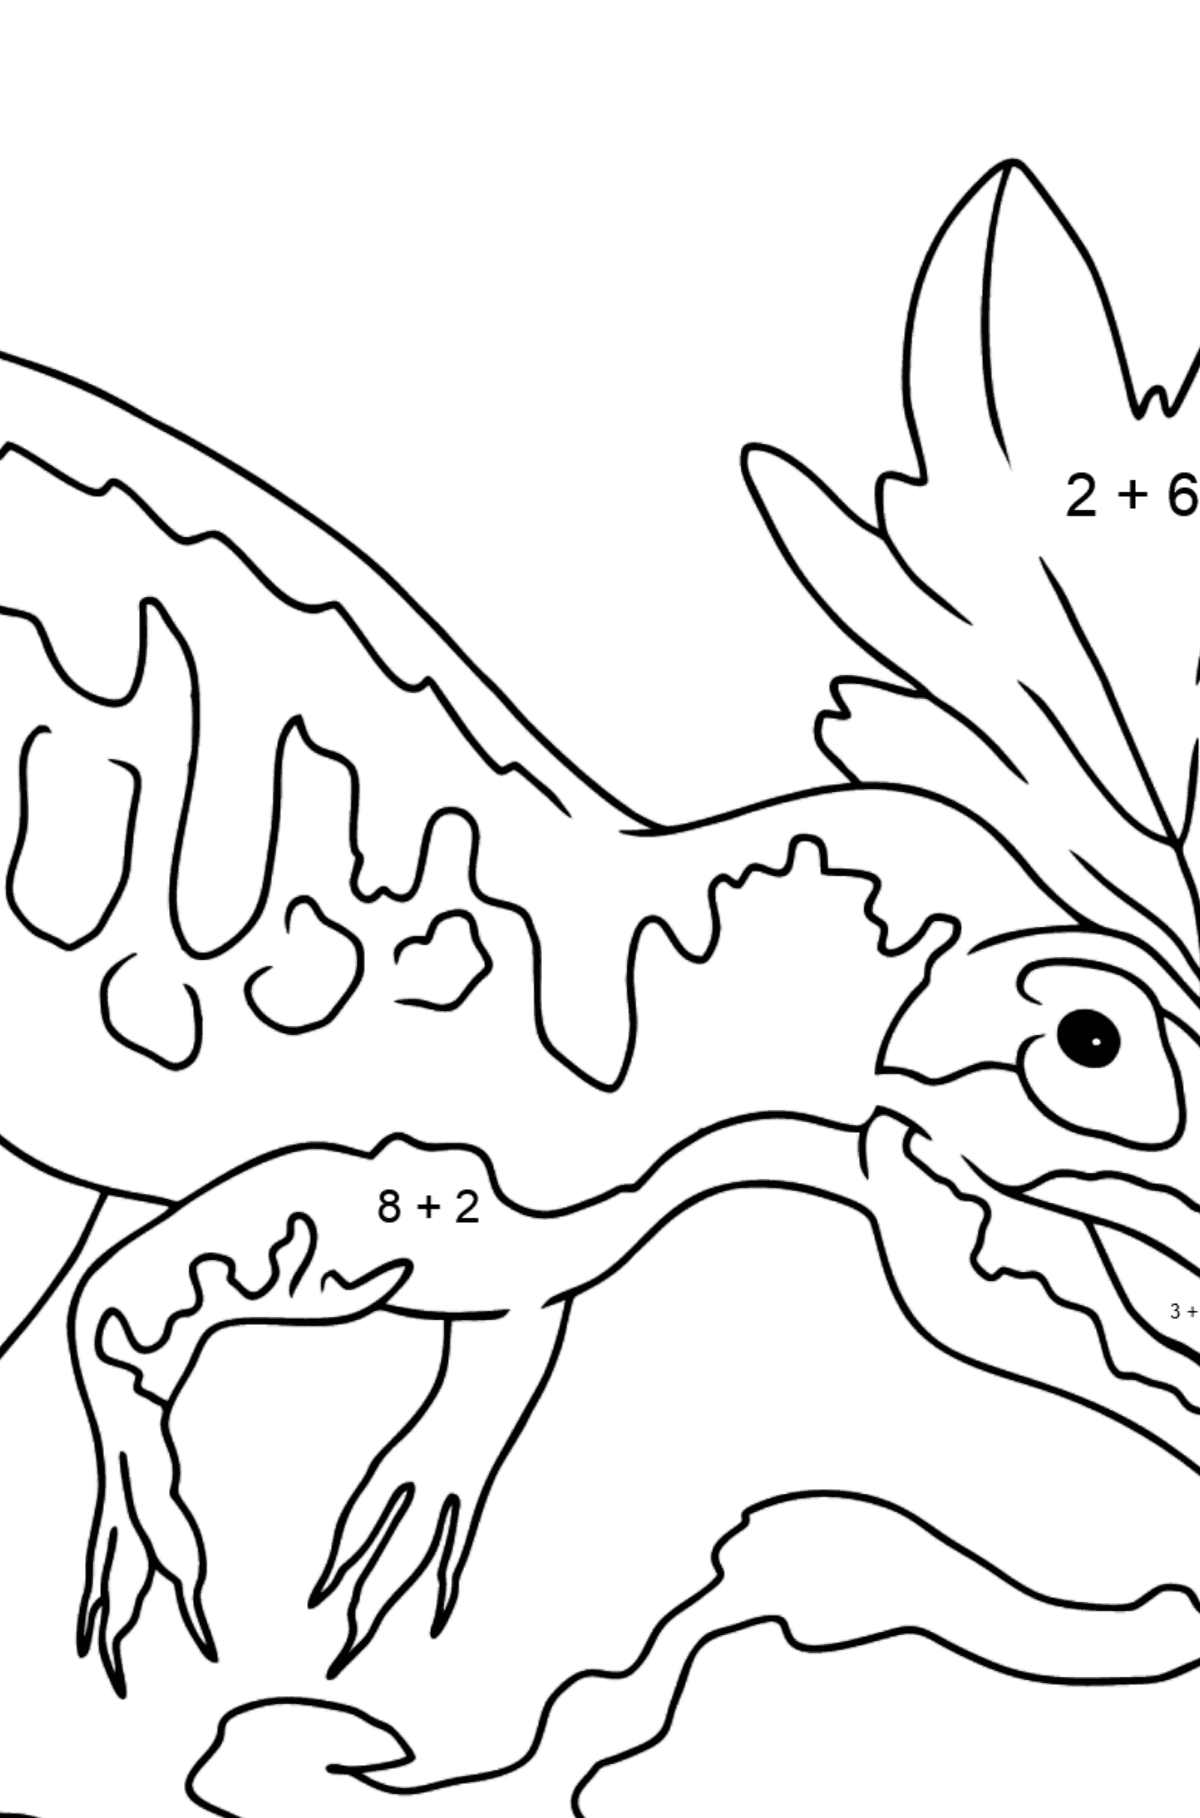 Allosaurus Coloring Page - Math Coloring - Addition for Kids